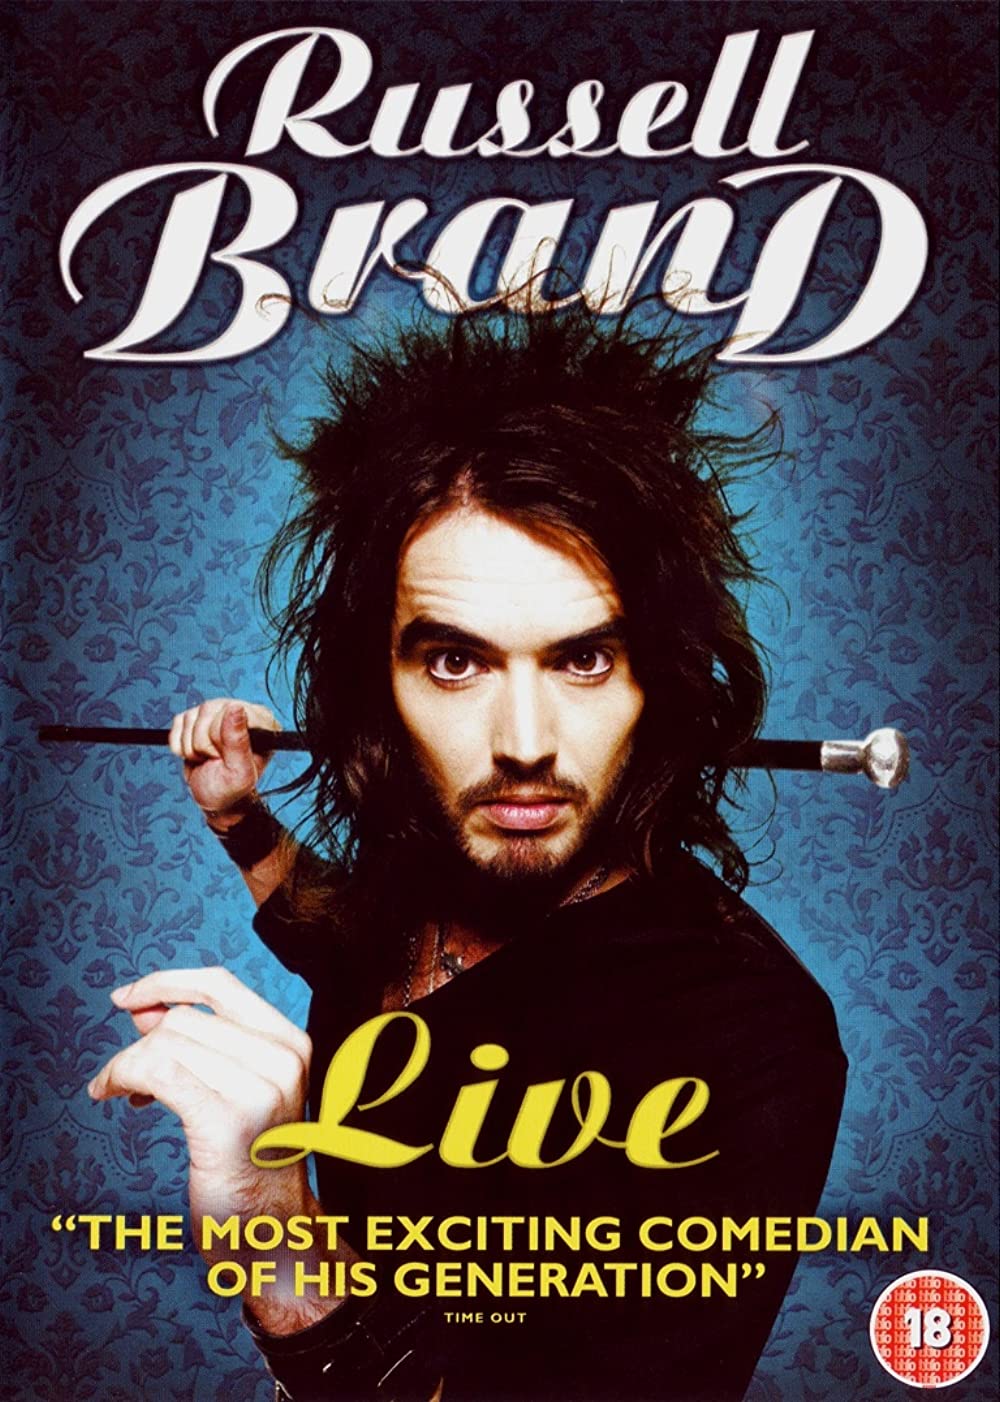 Download Russell Brand: Live Movie | Download Russell Brand: Live Review